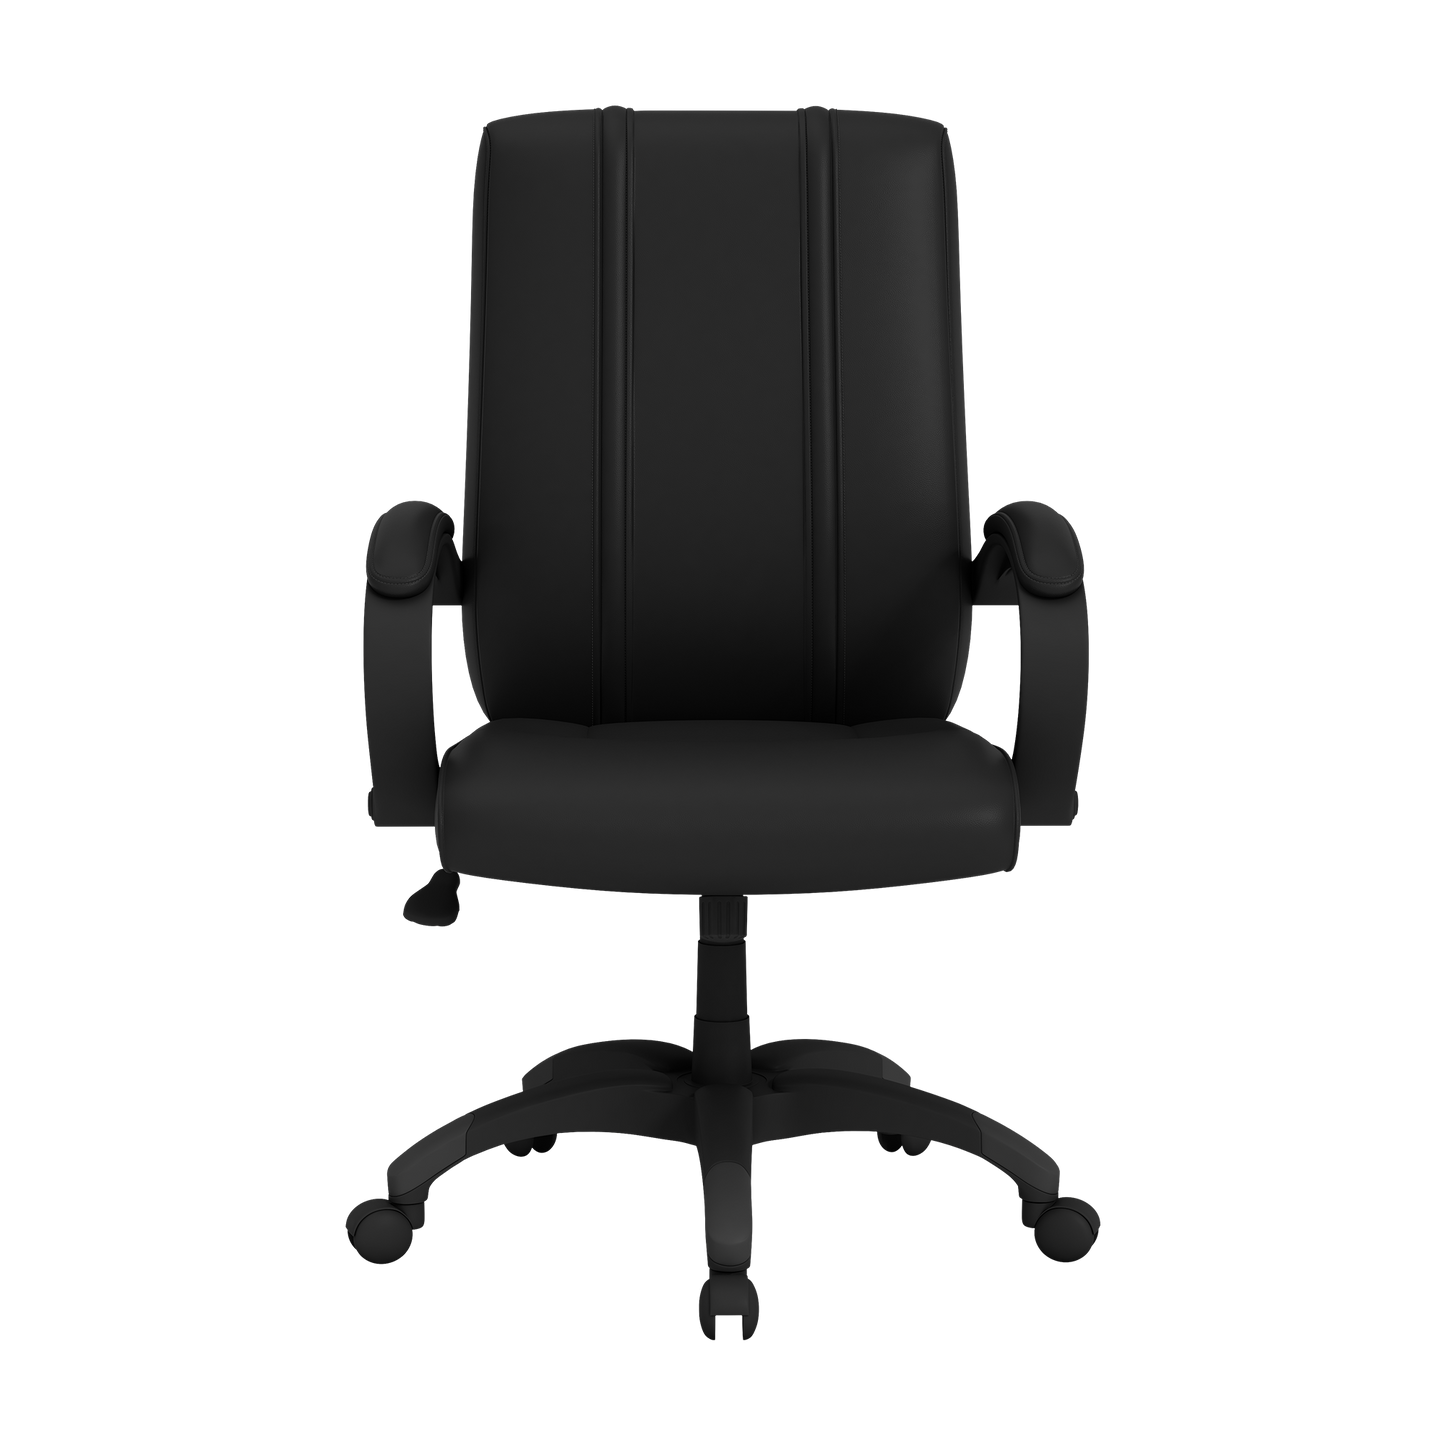 Office Chair 1000 with San Diego State Alternate